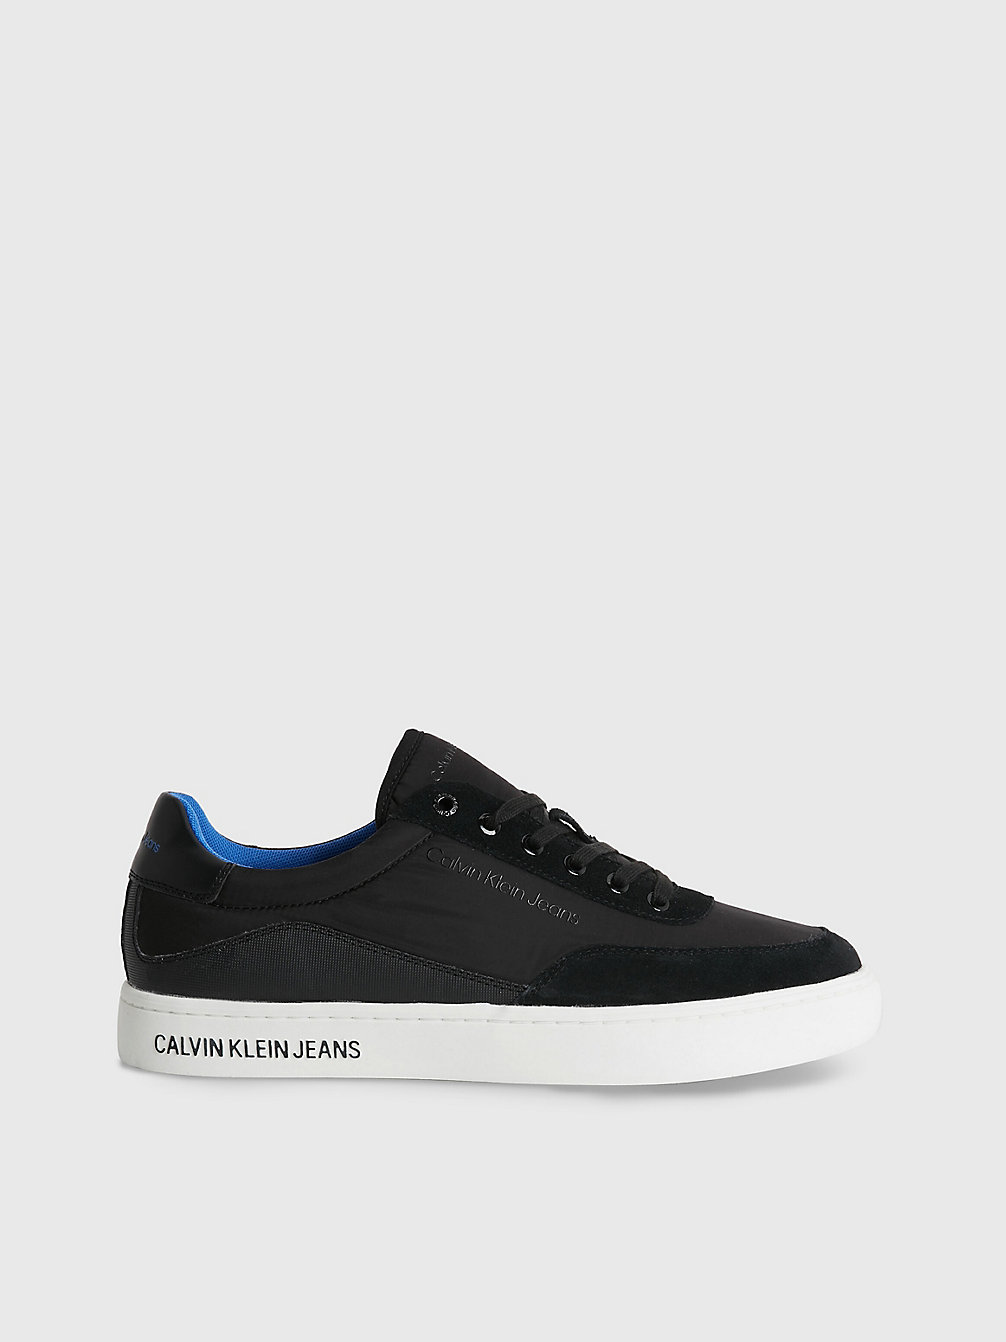 BLACK/IMPERIAL BLU > Recycled Trainers > undefined женщины - Calvin Klein